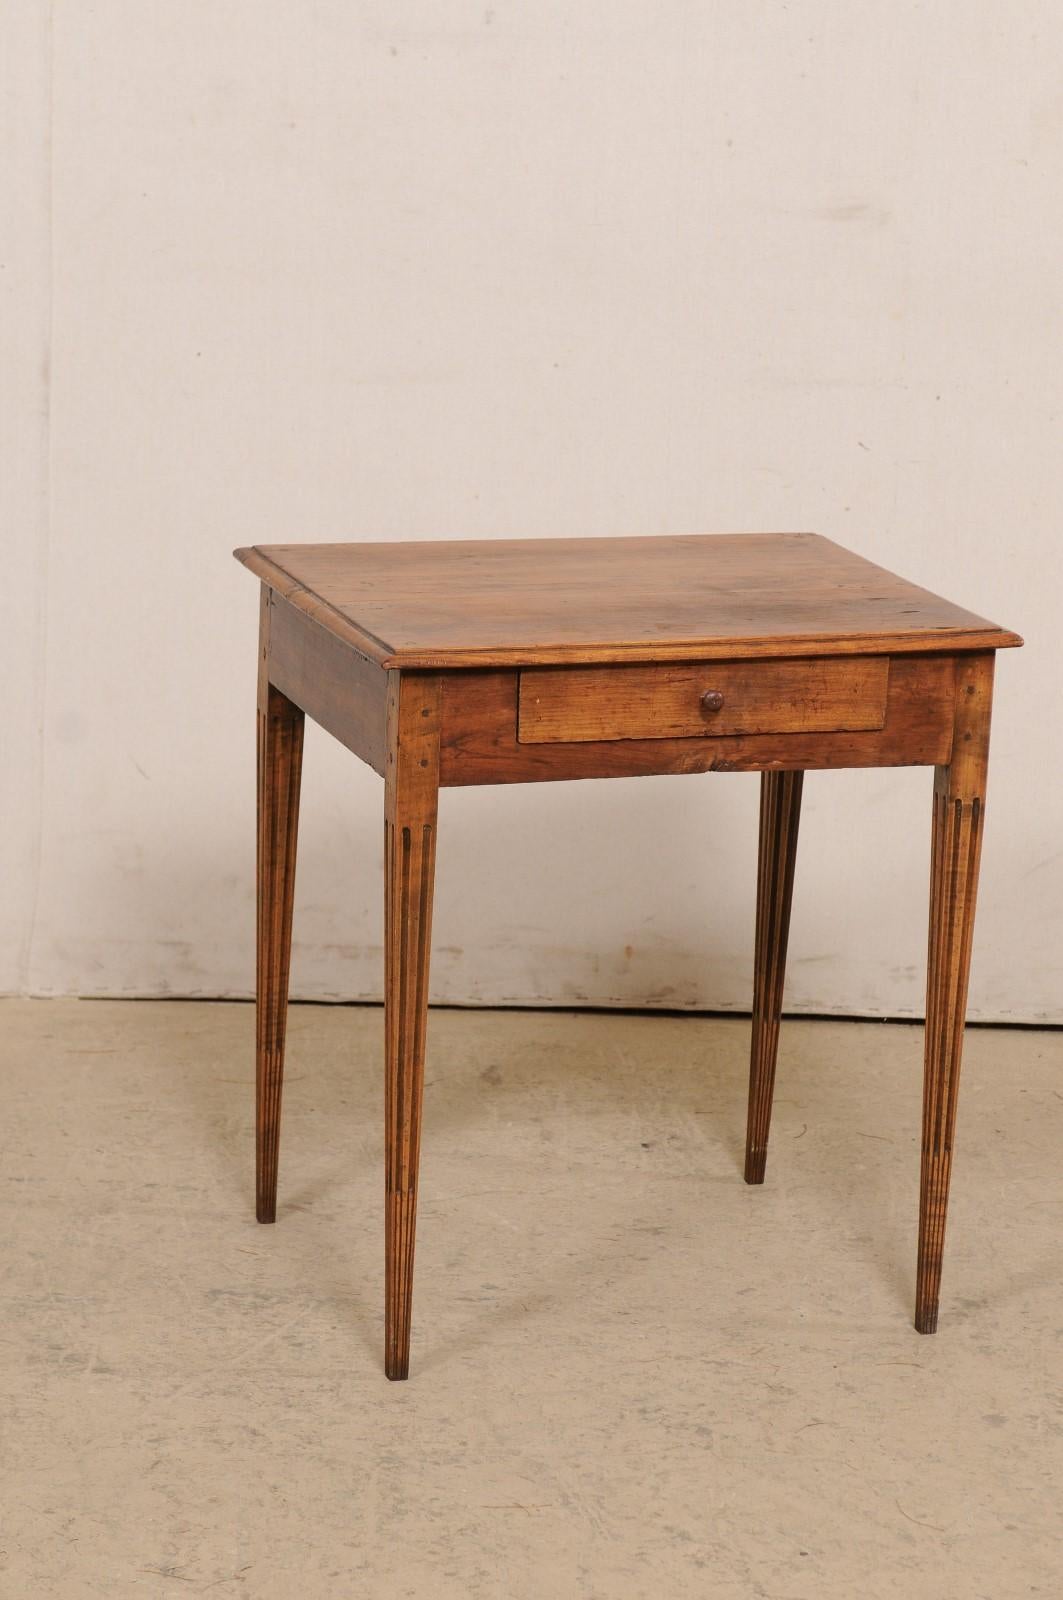 An Italian side table with single drawer from the 19th century. This antique table from Italy features a 24